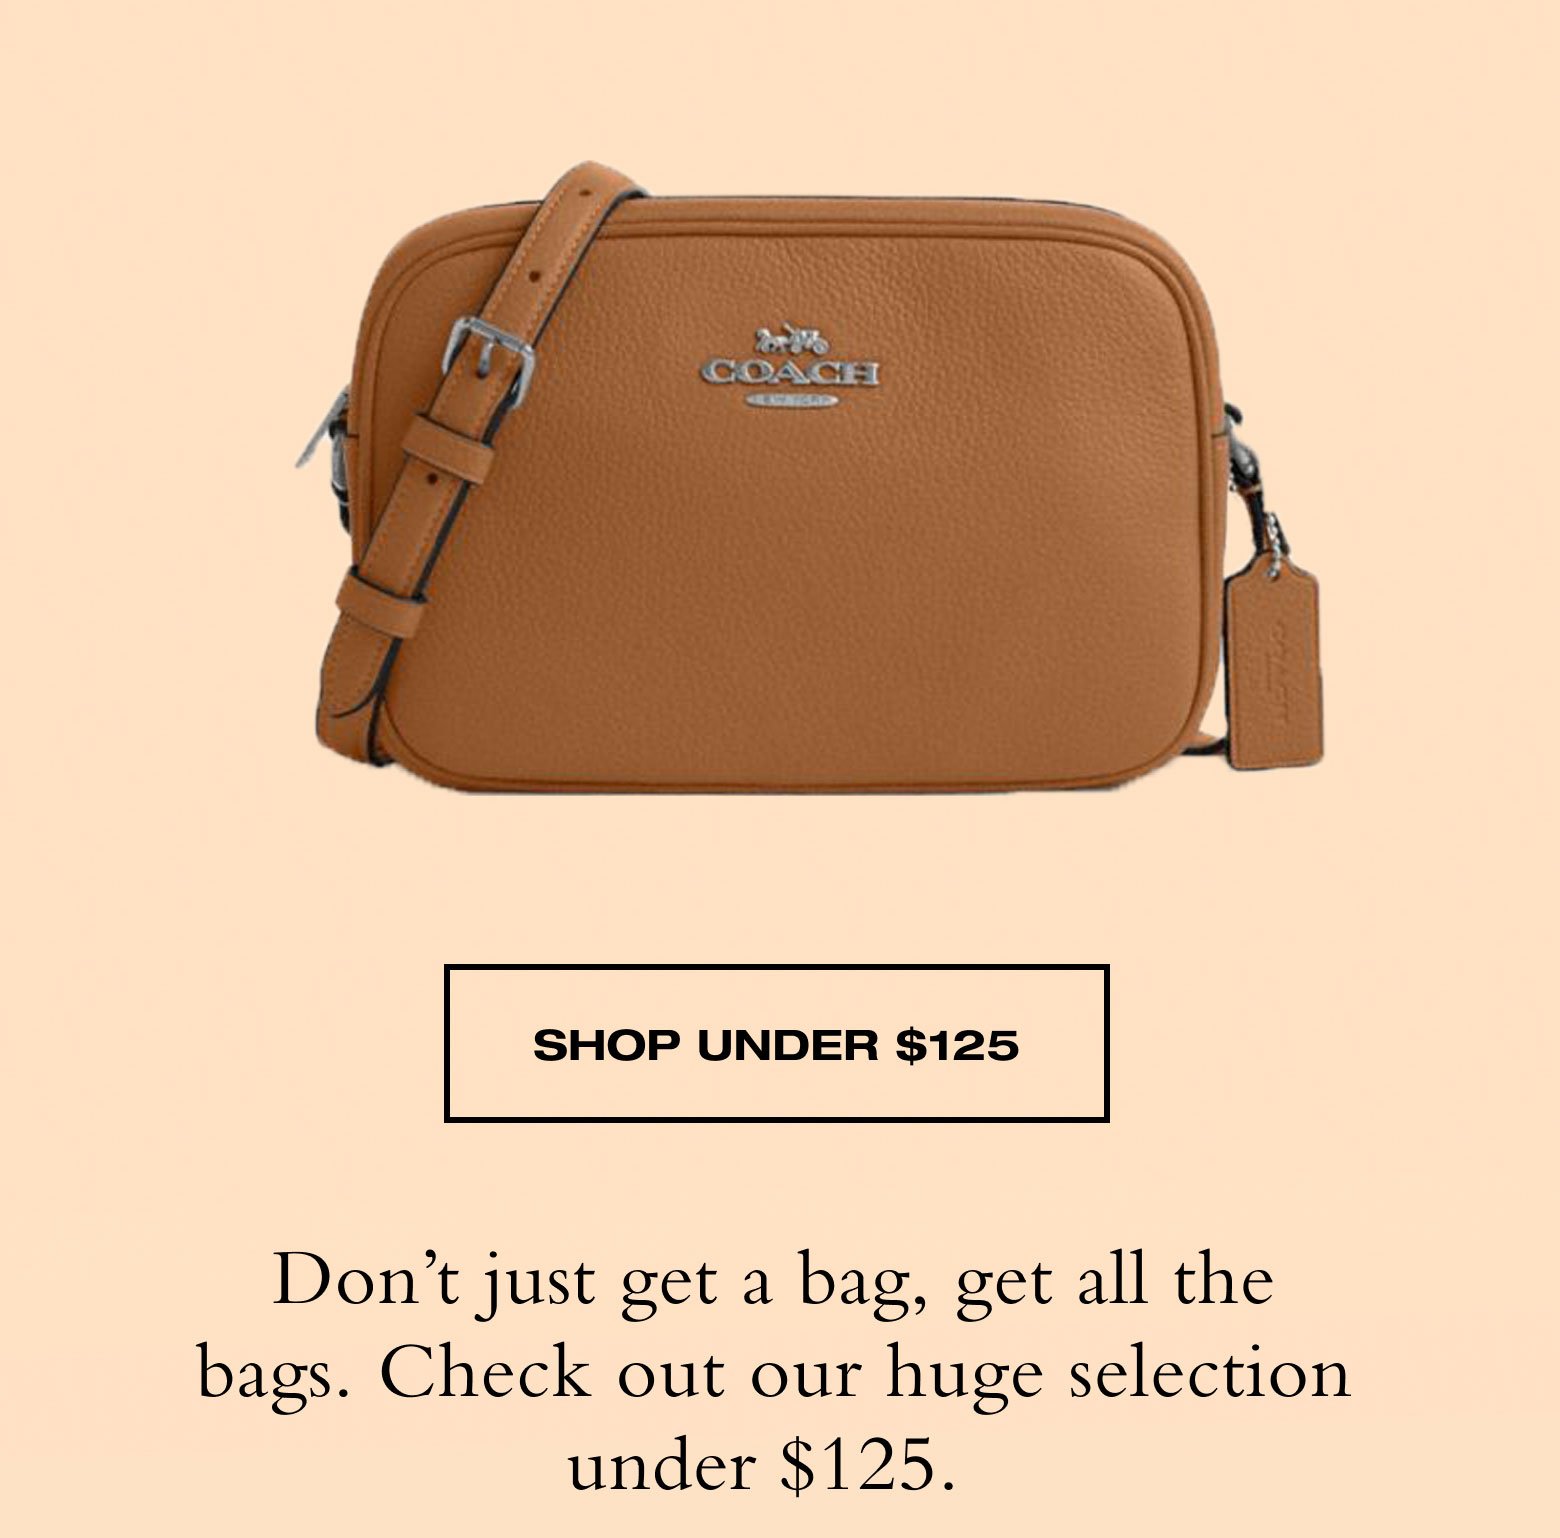 SHOP UNDER \\$125. Don’t just get a bag, get all the bags. Check out our huge selection under \\$125.\xa0